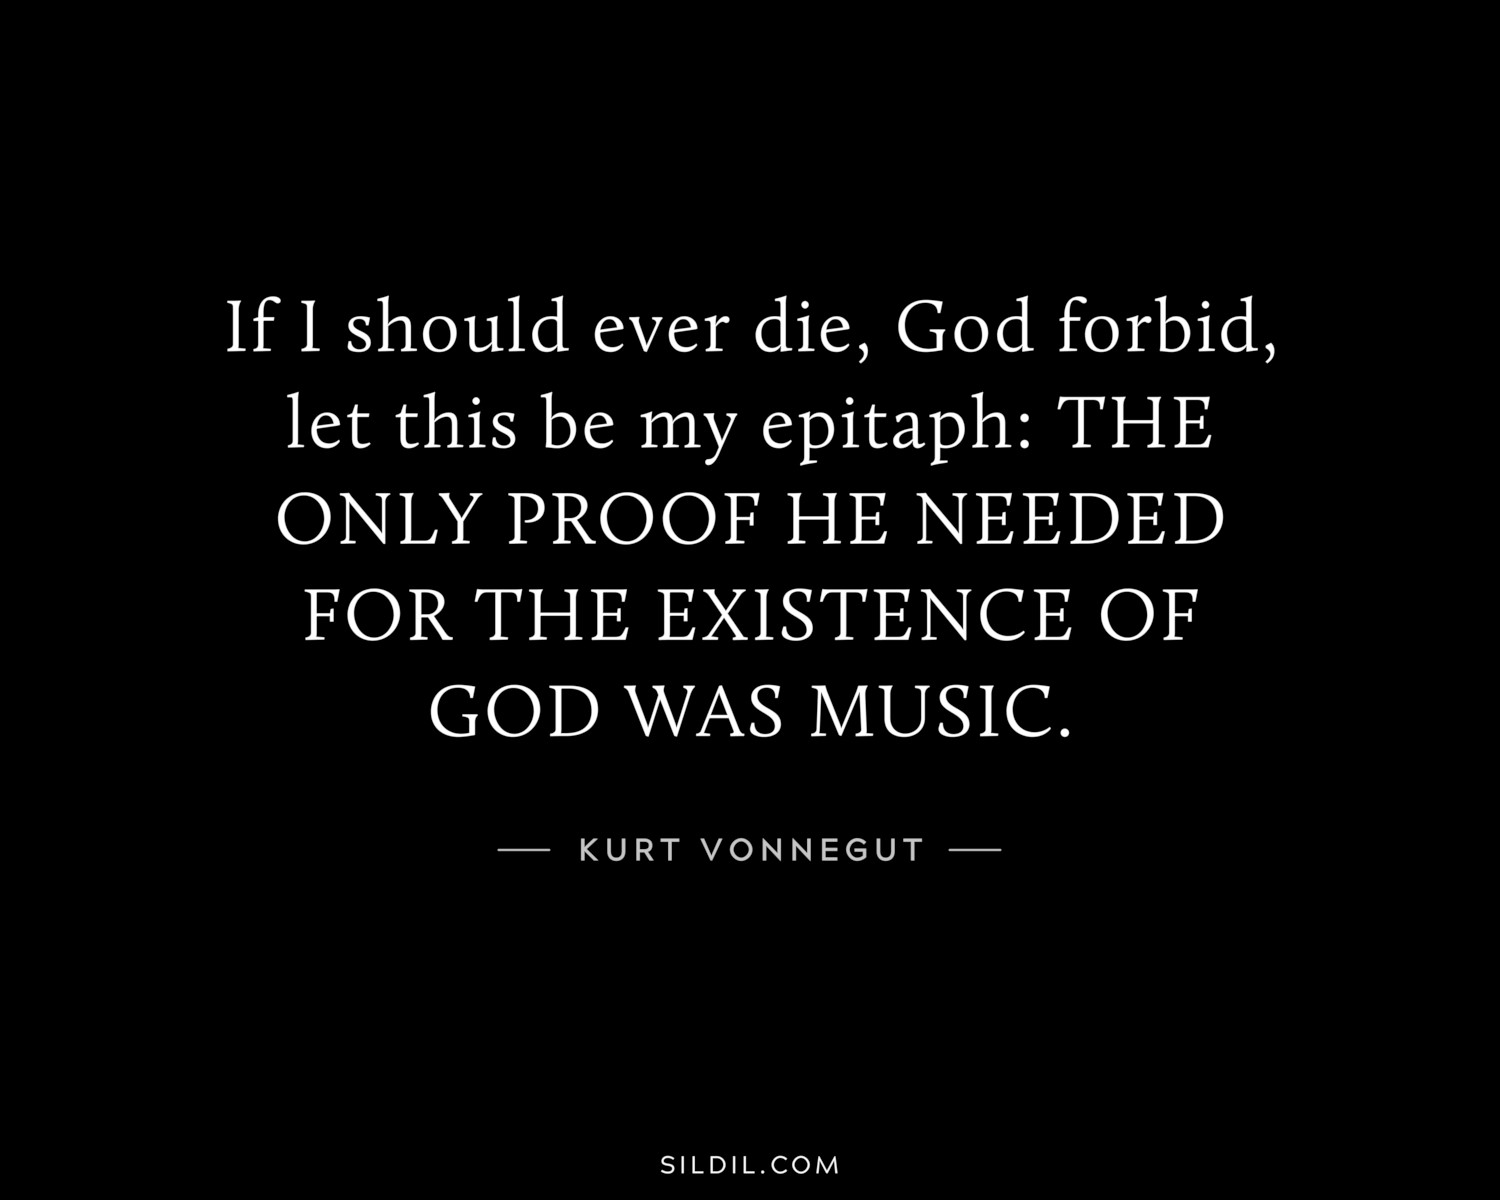 If I should ever die, God forbid, let this be my epitaph: THE ONLY PROOF HE NEEDED FOR THE EXISTENCE OF GOD WAS MUSIC.